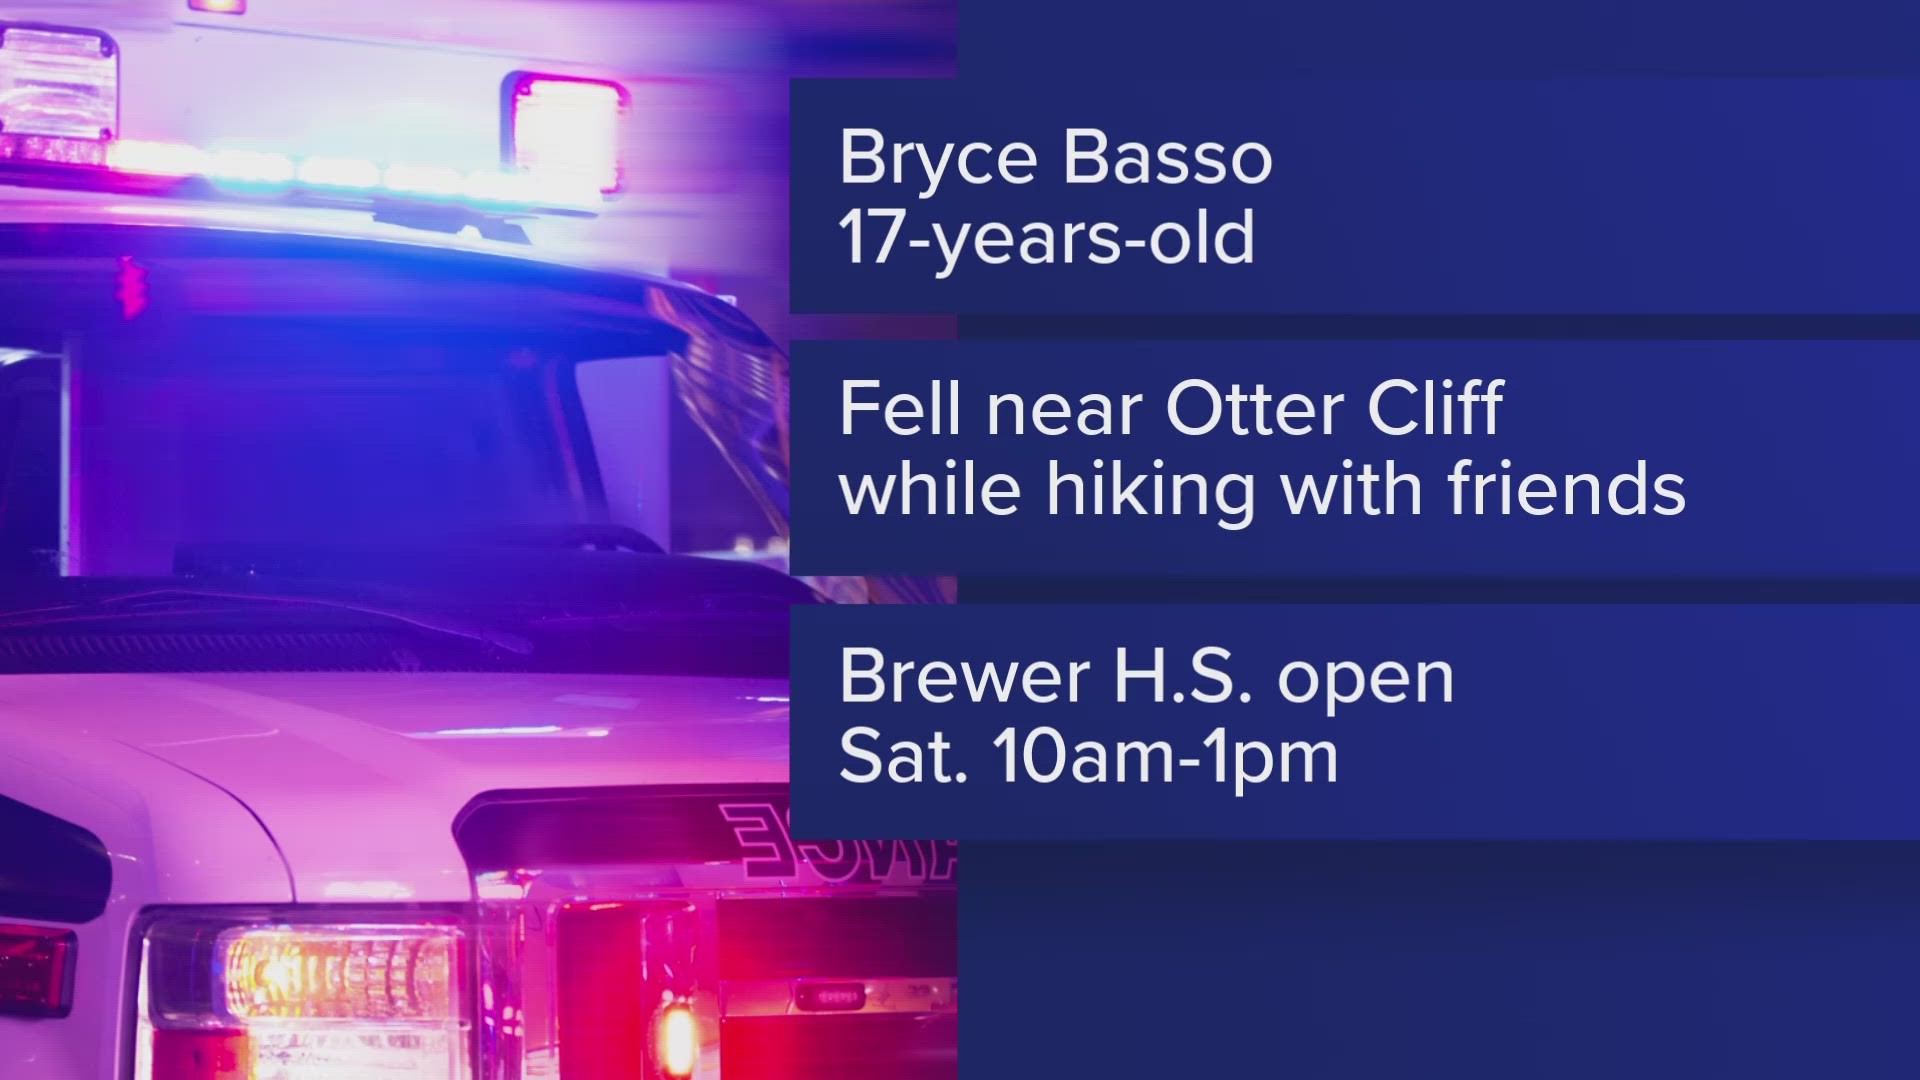 The 17-year-old was reportedly hiking with friends at the time of the incident, a release said.